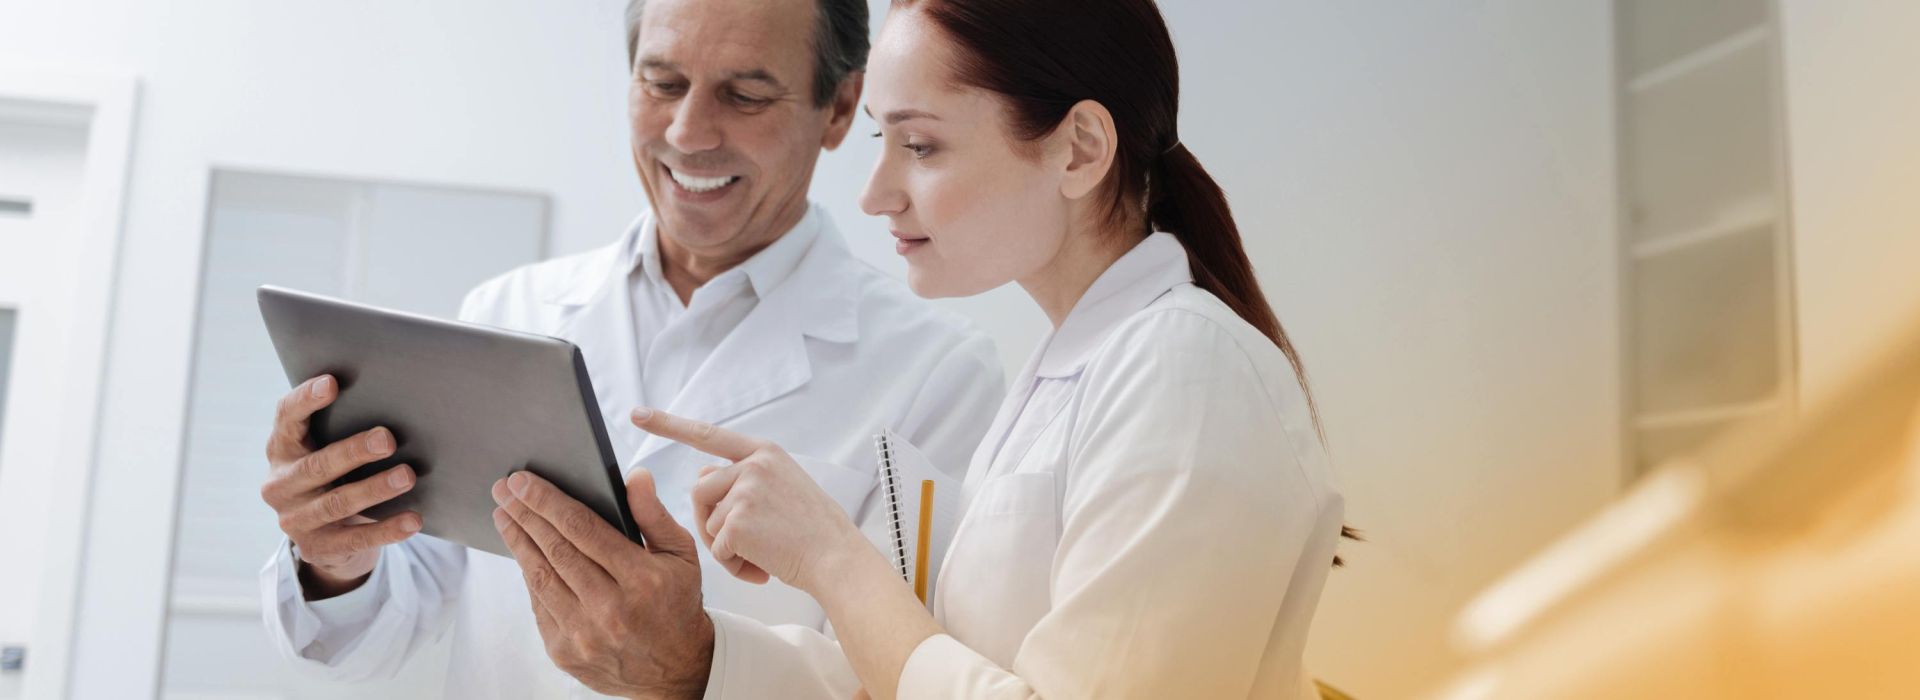 A female doctor and a male doctor look at medical data on a tablet in a good mood